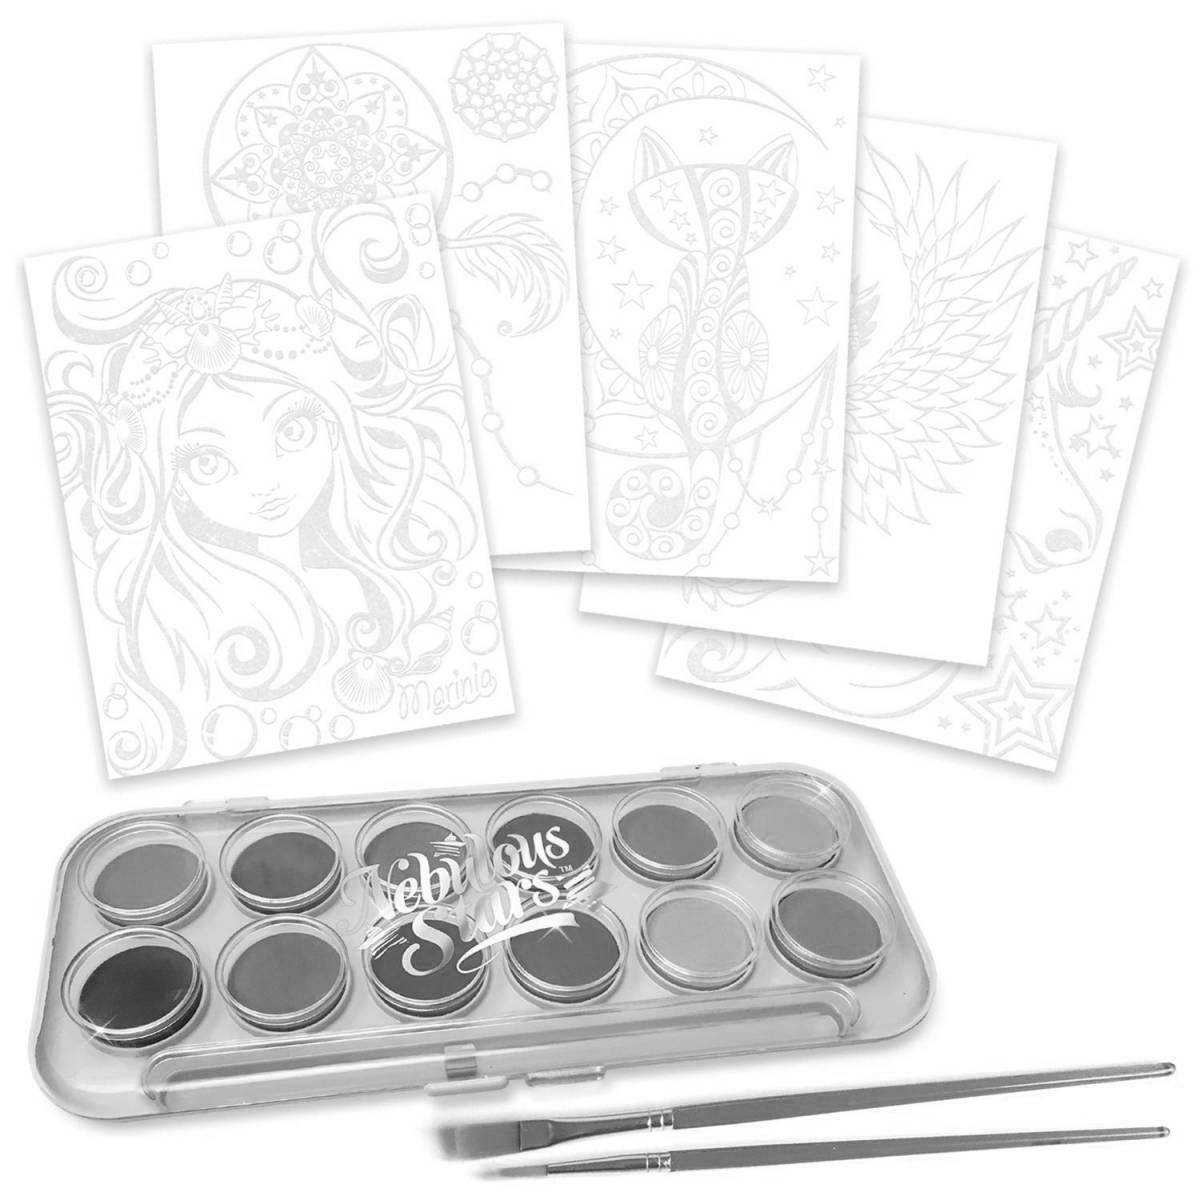 Dazzling misty stars coloring book